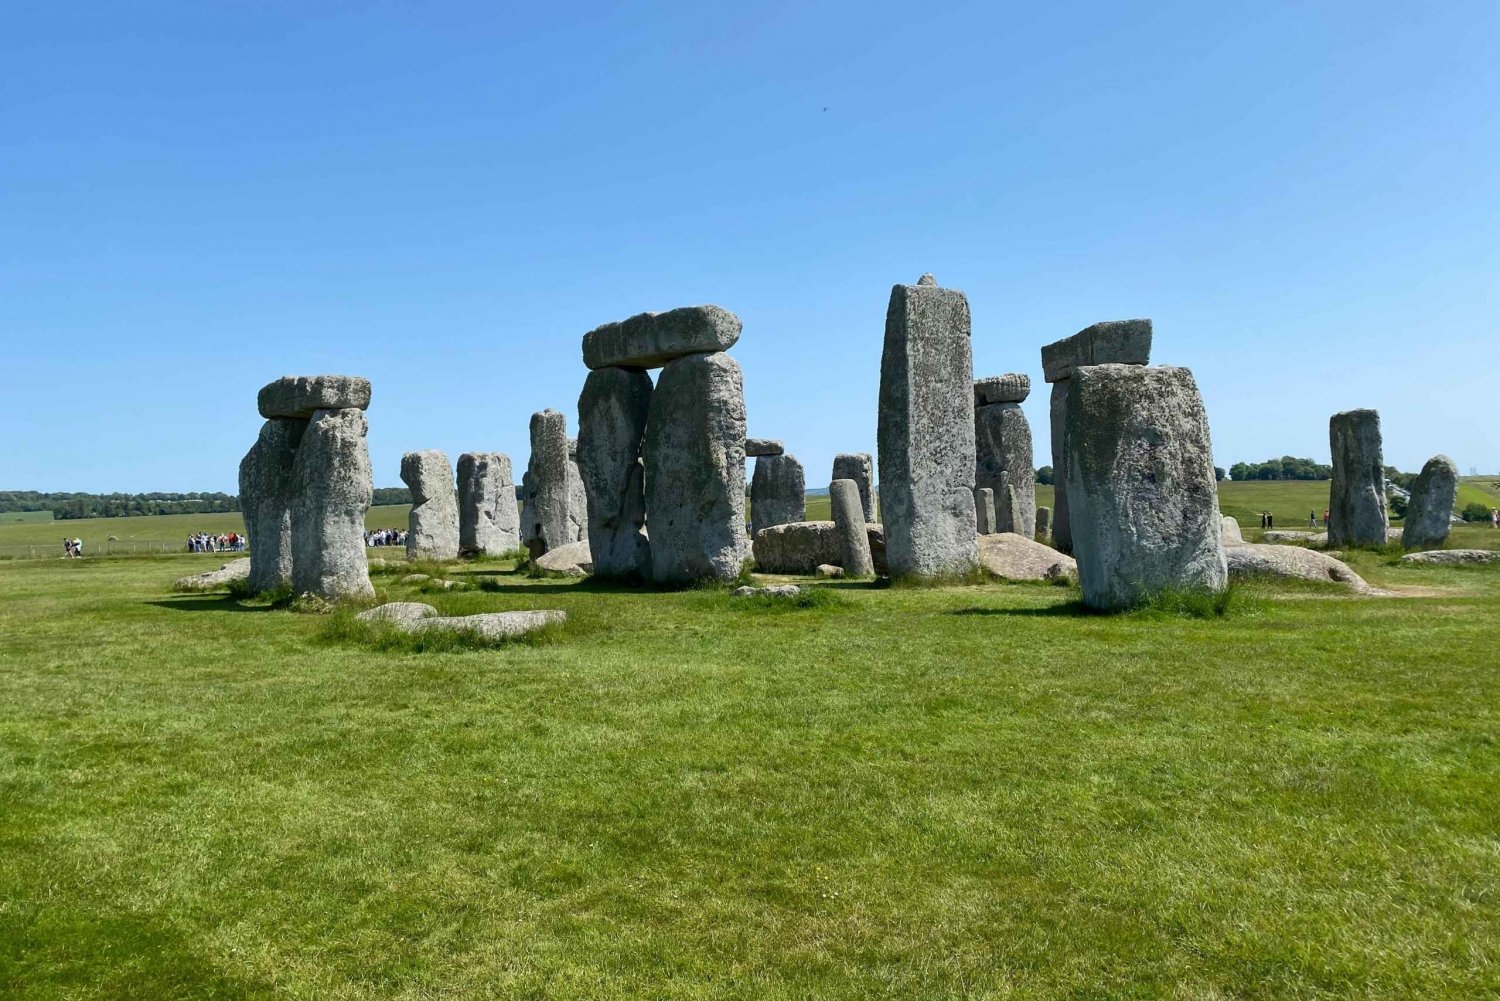 Individual trip to Stonehenge including pickup and drop off